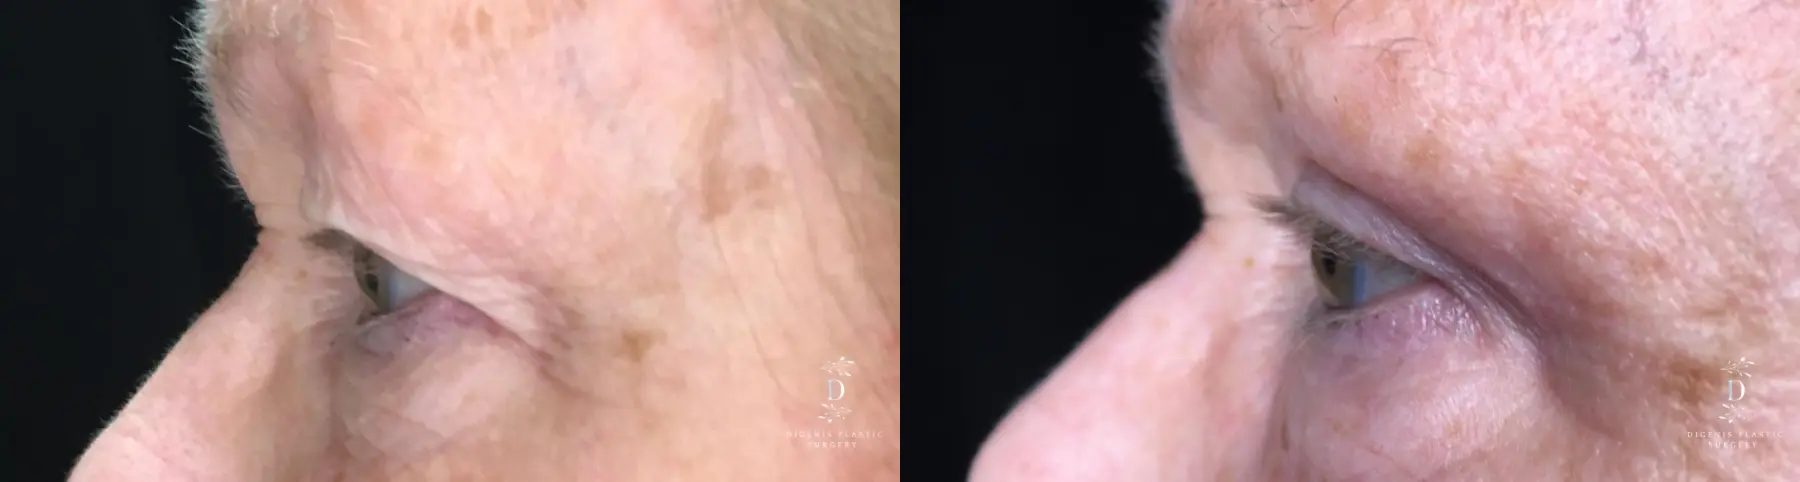 Eyelid Surgery: Patient 25 - Before and After 5